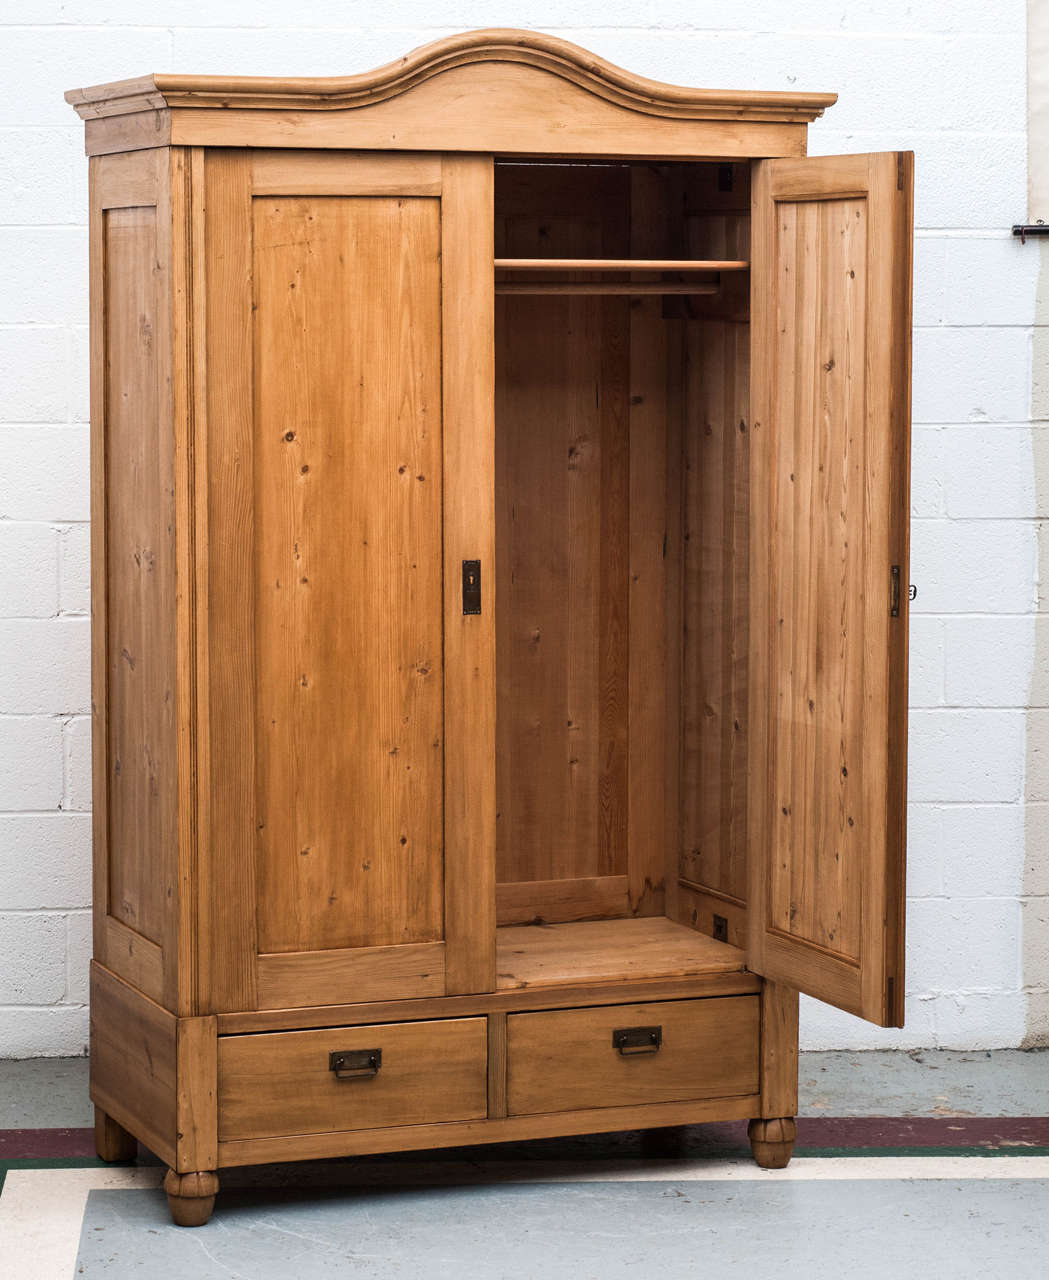 A handsome and spacious bonnet top pine armoire featuring two flat panelled doors, panelled sides and two deep hand-cut dovetailed drawers. Interior has hat shelf and hanging pole. This piece entirely breaks down for easy delivery and access to